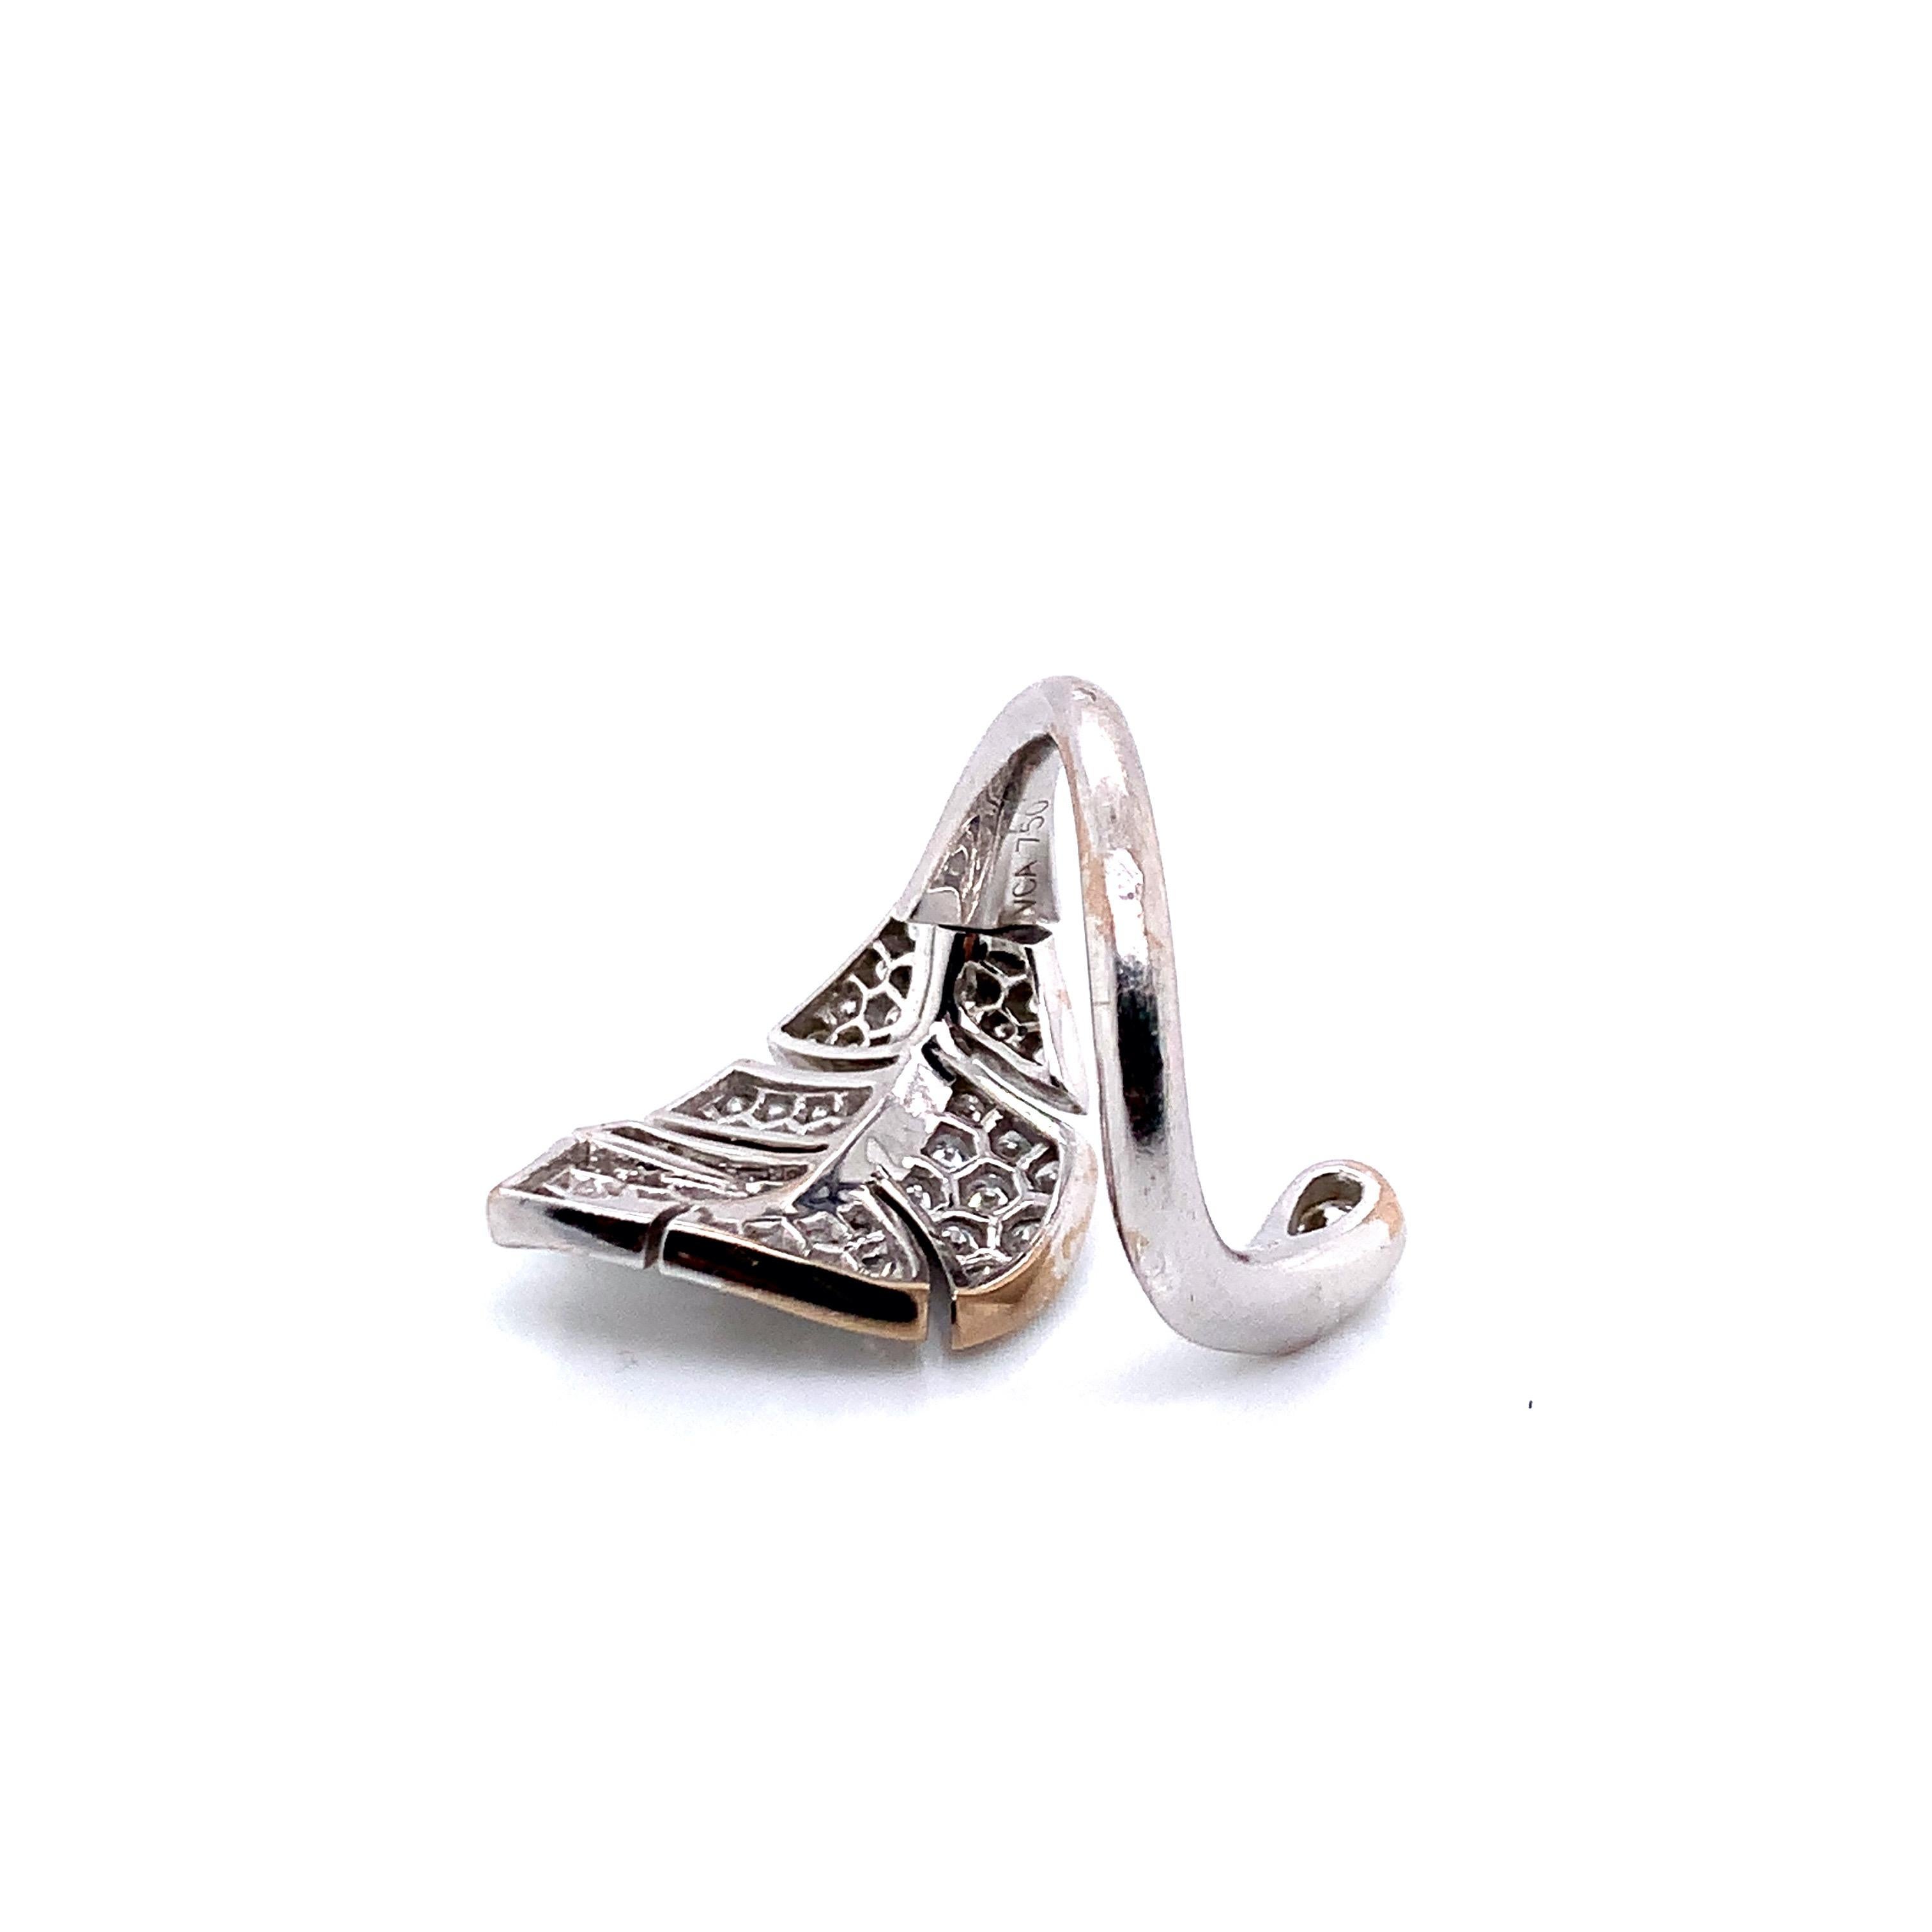 Signed Van Cleef & Arpels (VCA), this white gold ring has a moving leaf motif. Total weight is 9.9 grams. 